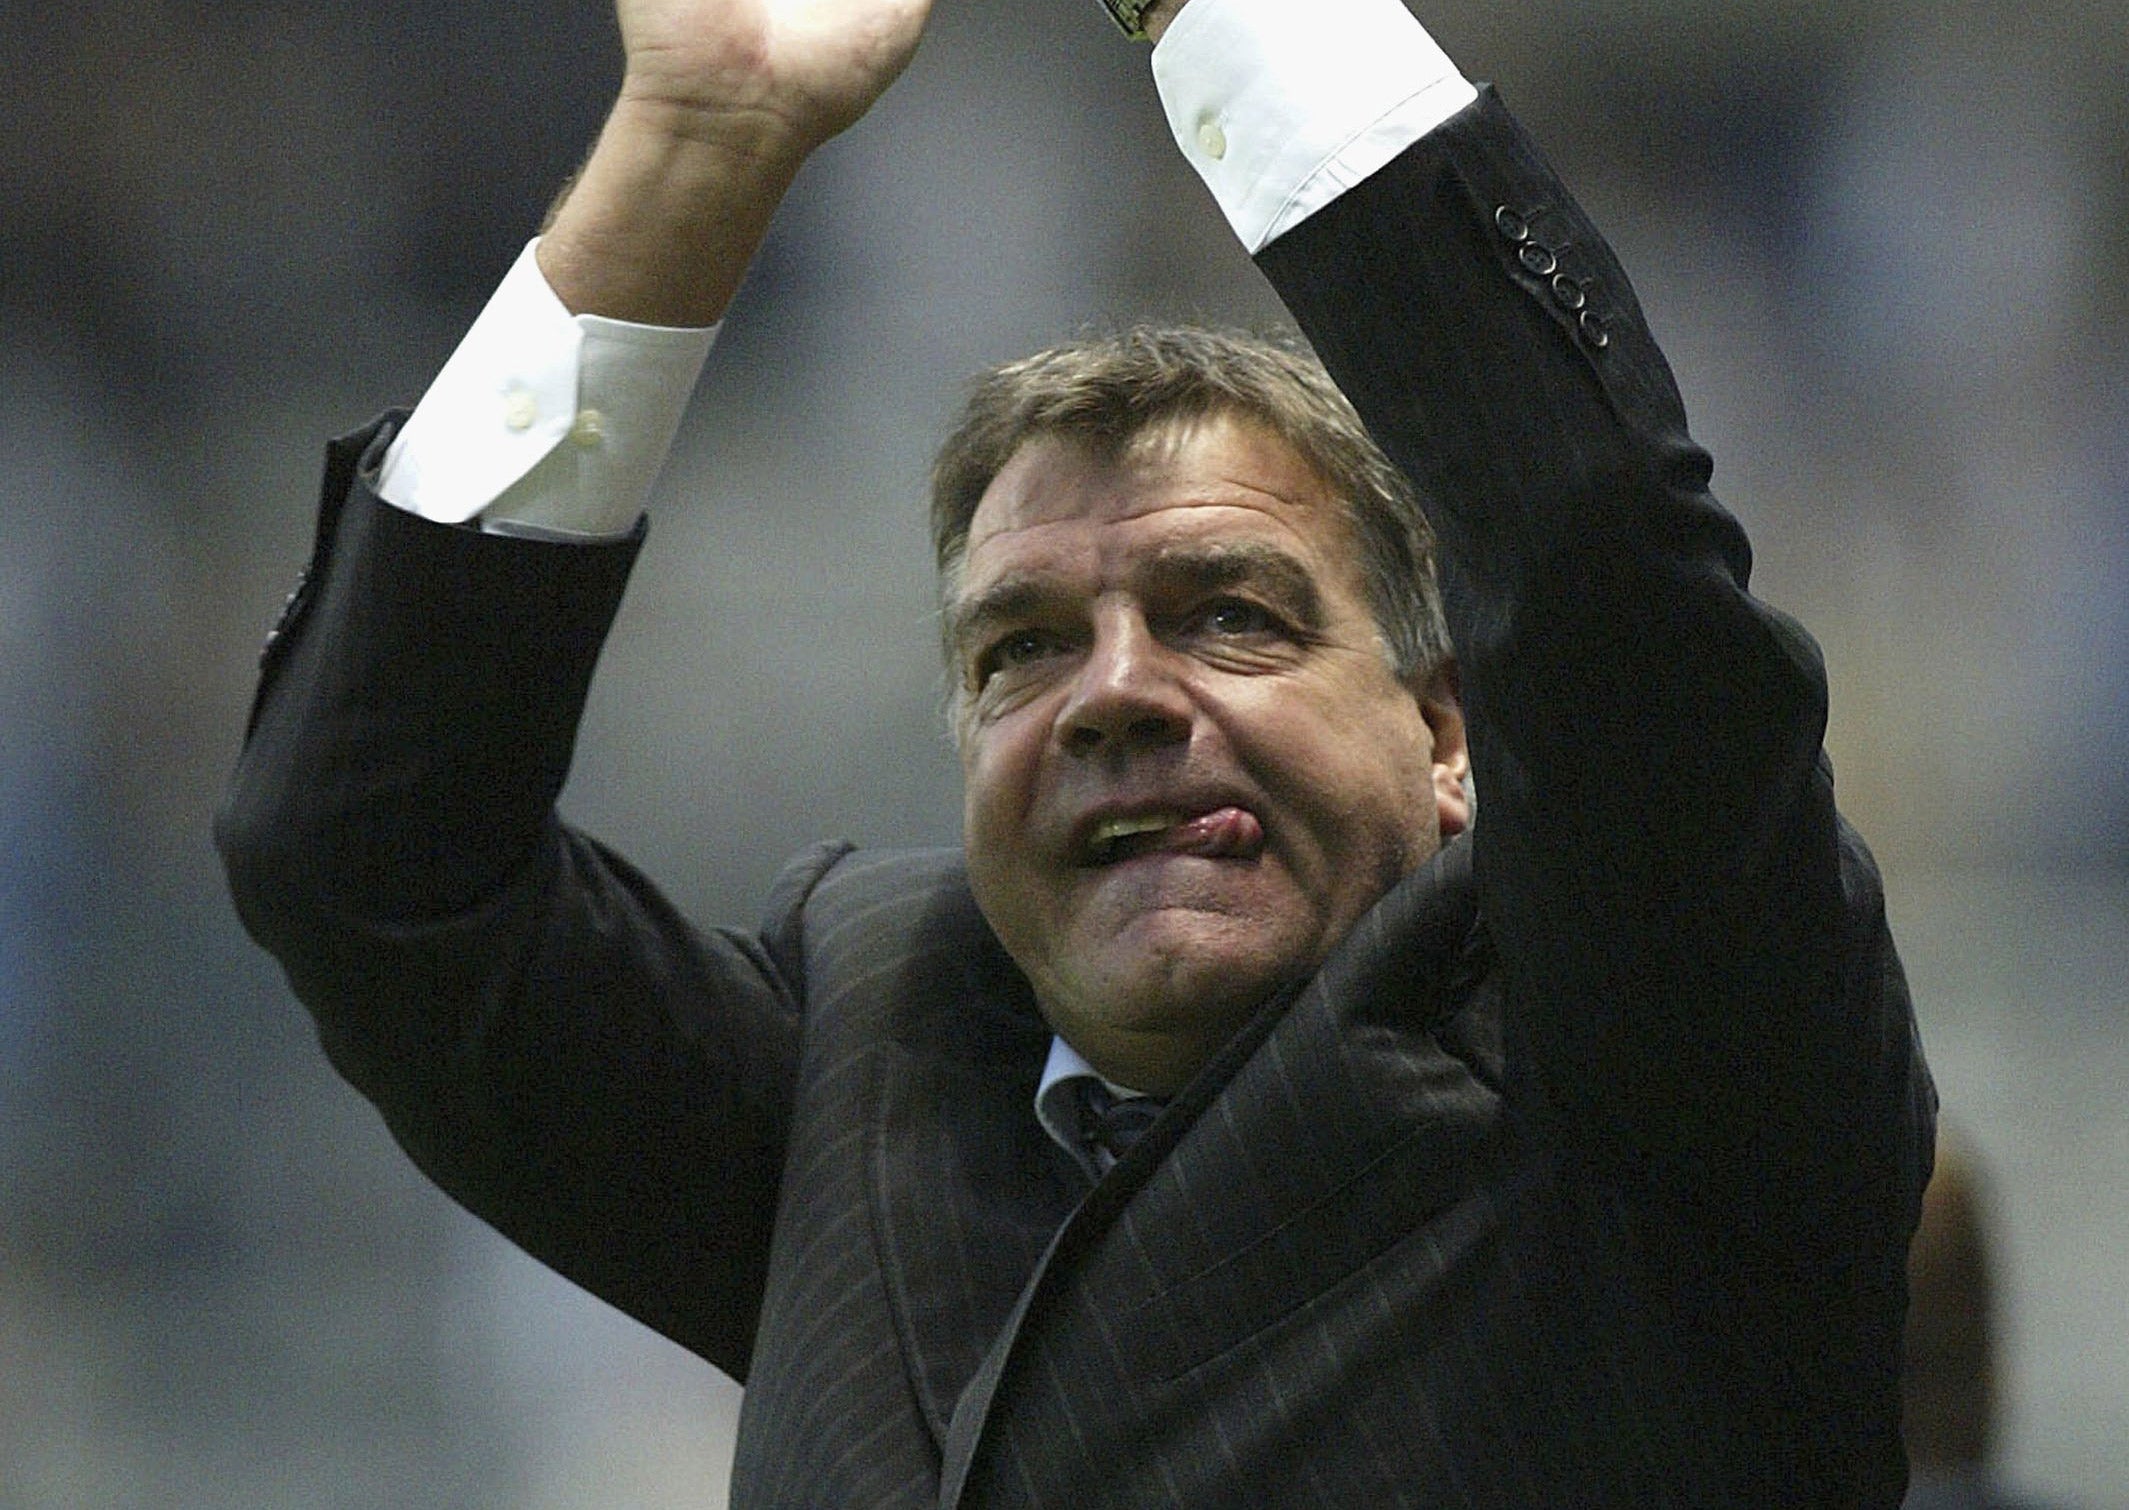 Allardyce was ultimately overlooked for the post in favour of Steve McClaren